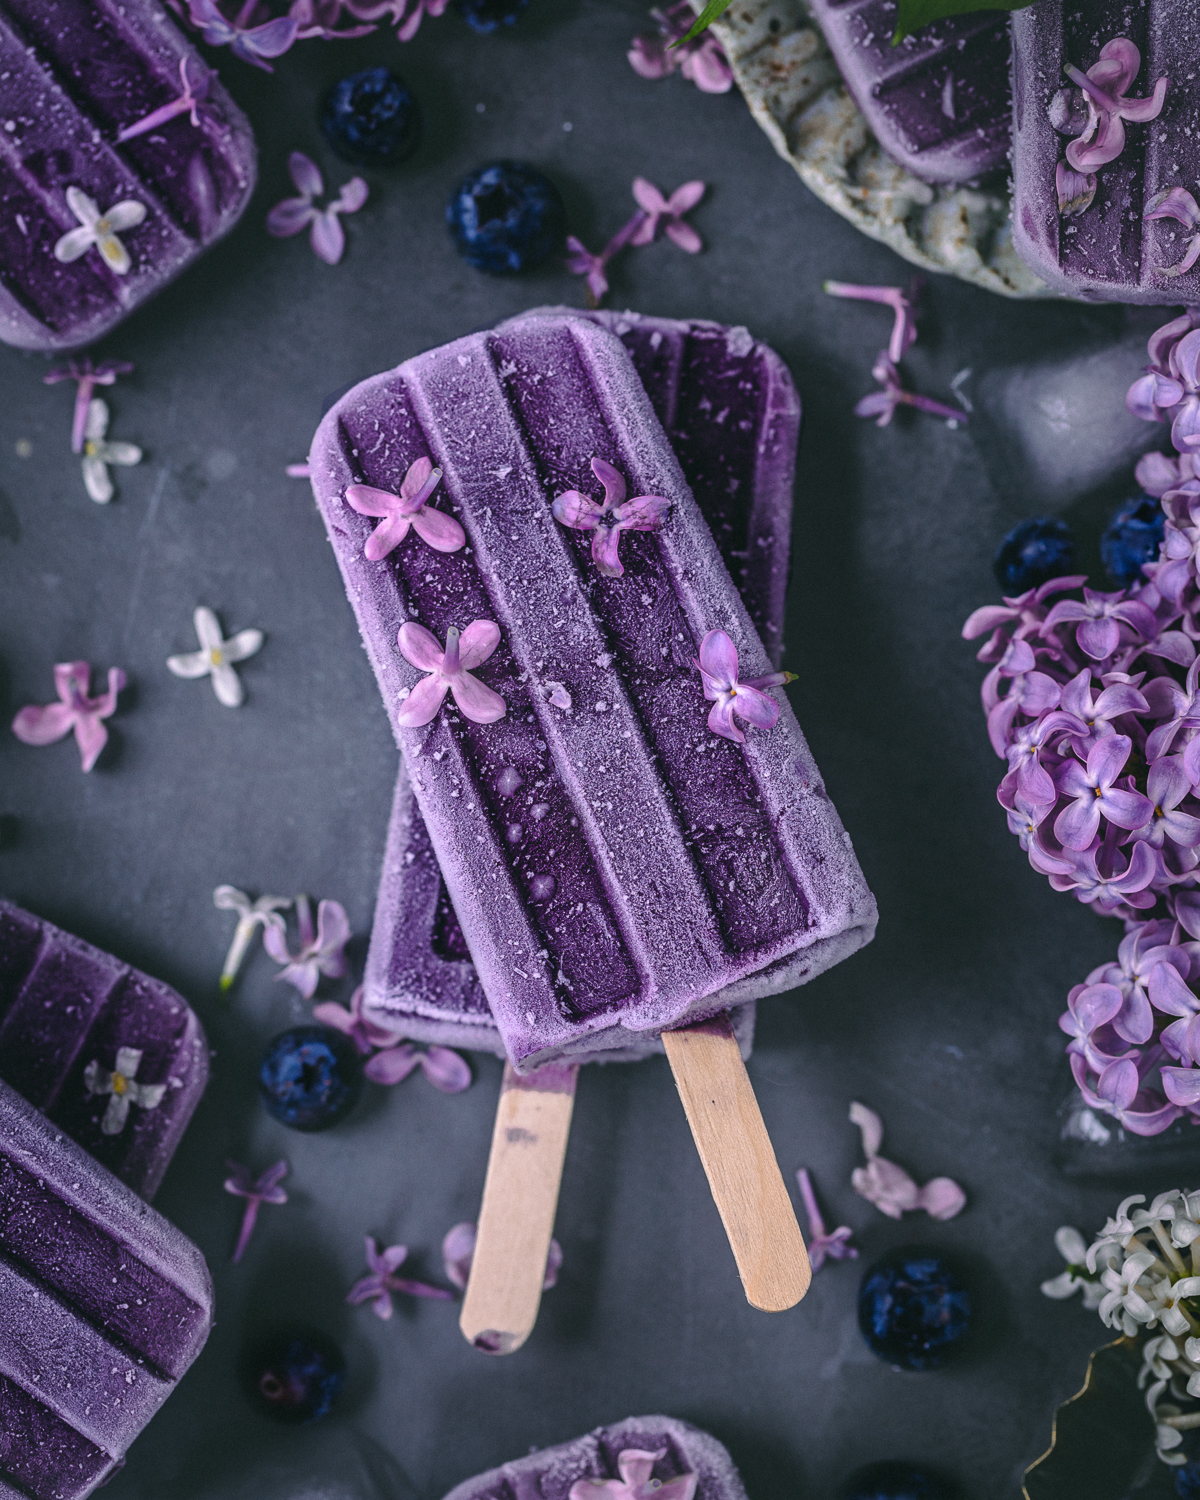 Purple ice lollies made with wild blueberries